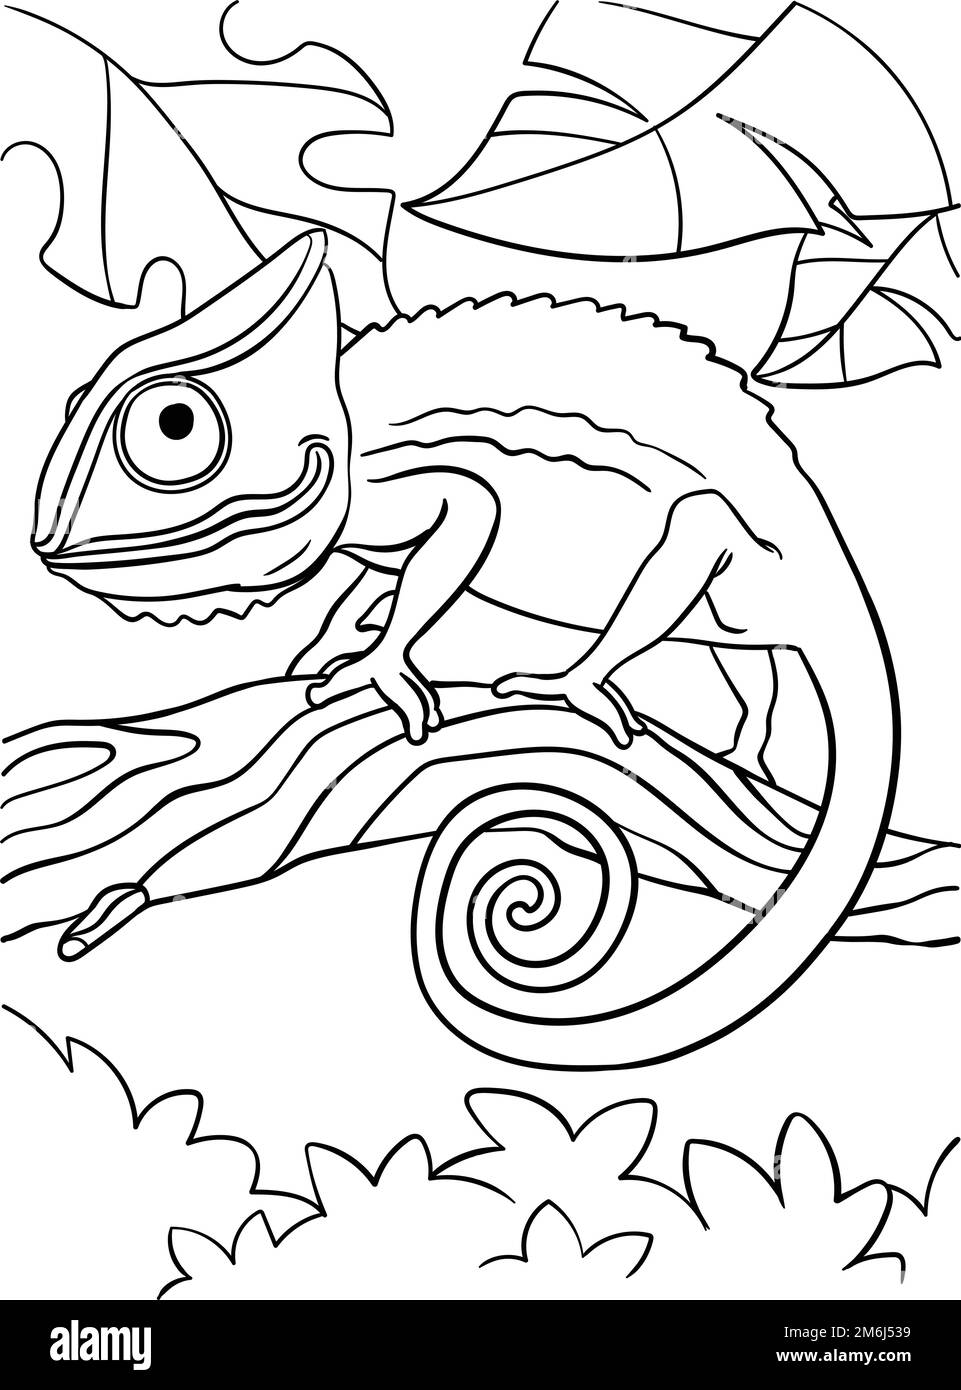 Chameleons Coloring Page for Kids Stock Vector